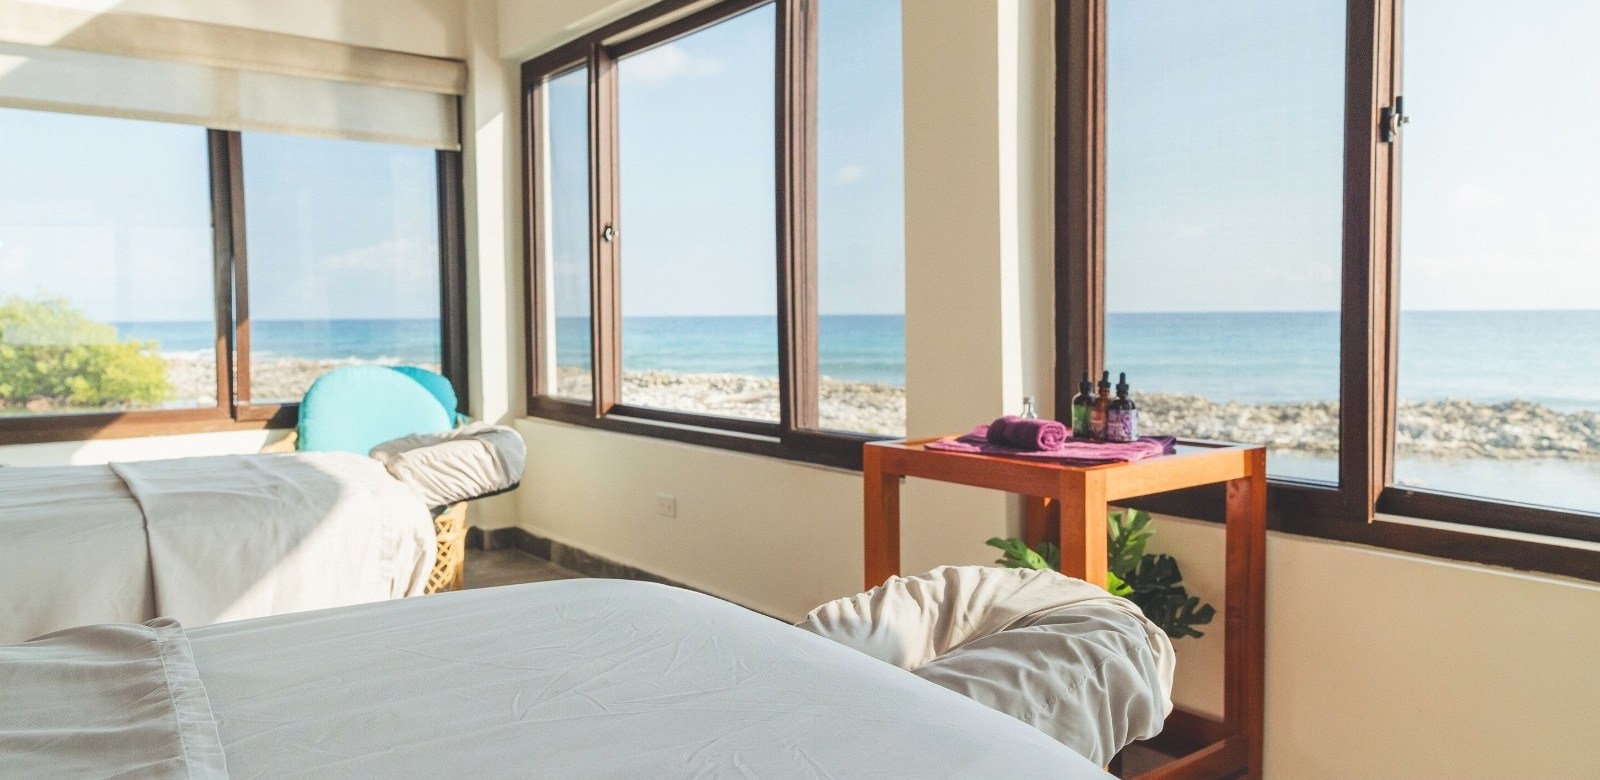 Picturesque ocean views from the Tranquil Tides Spa at Manta Island Resort